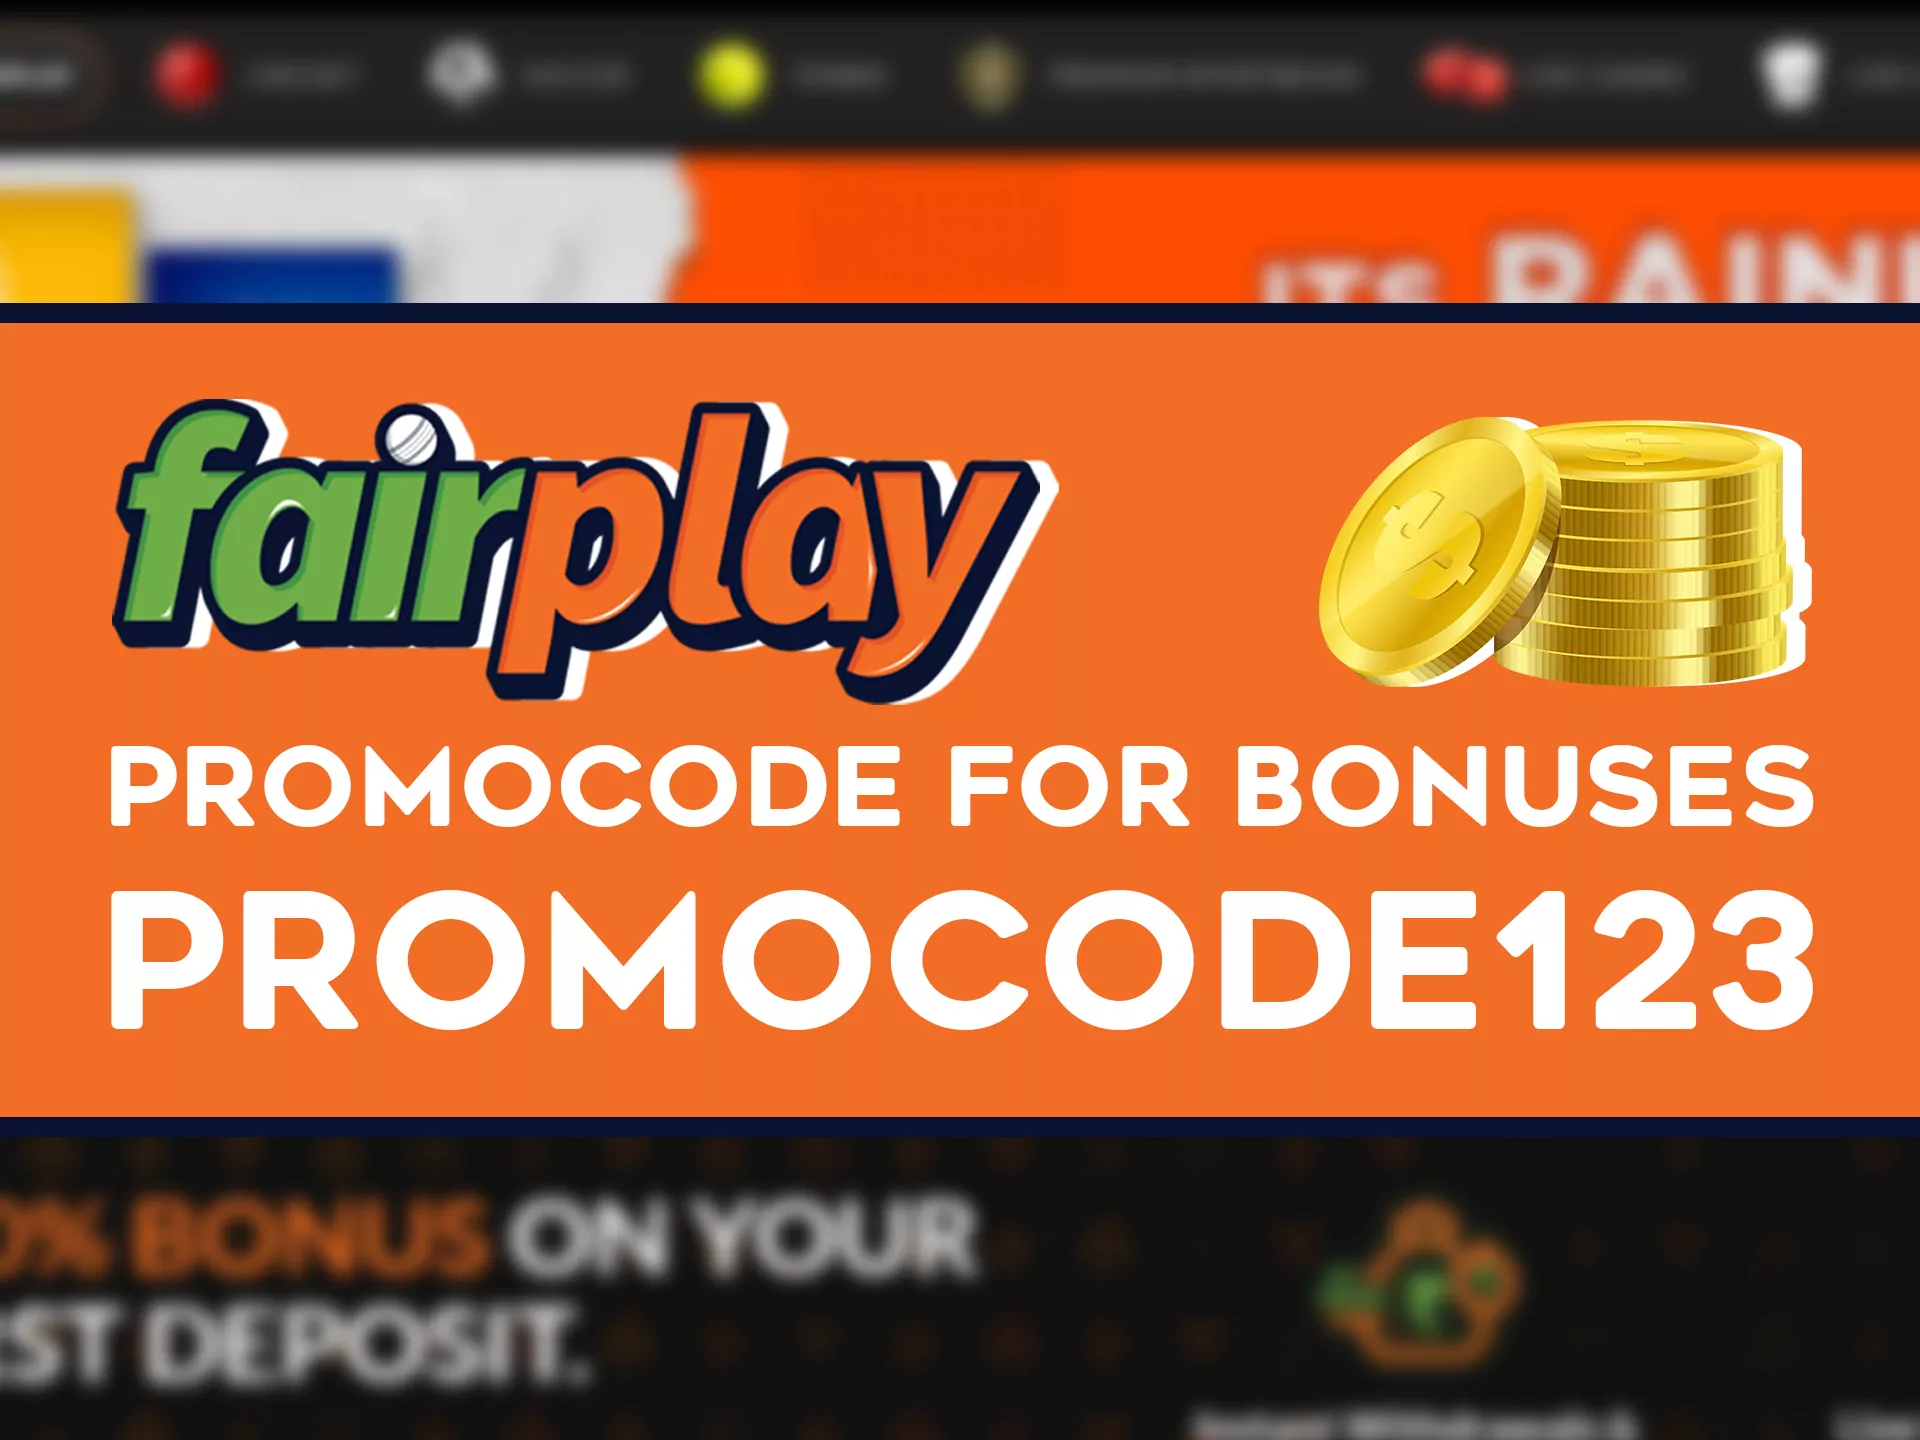 Use our promo code to get additional bonuses.